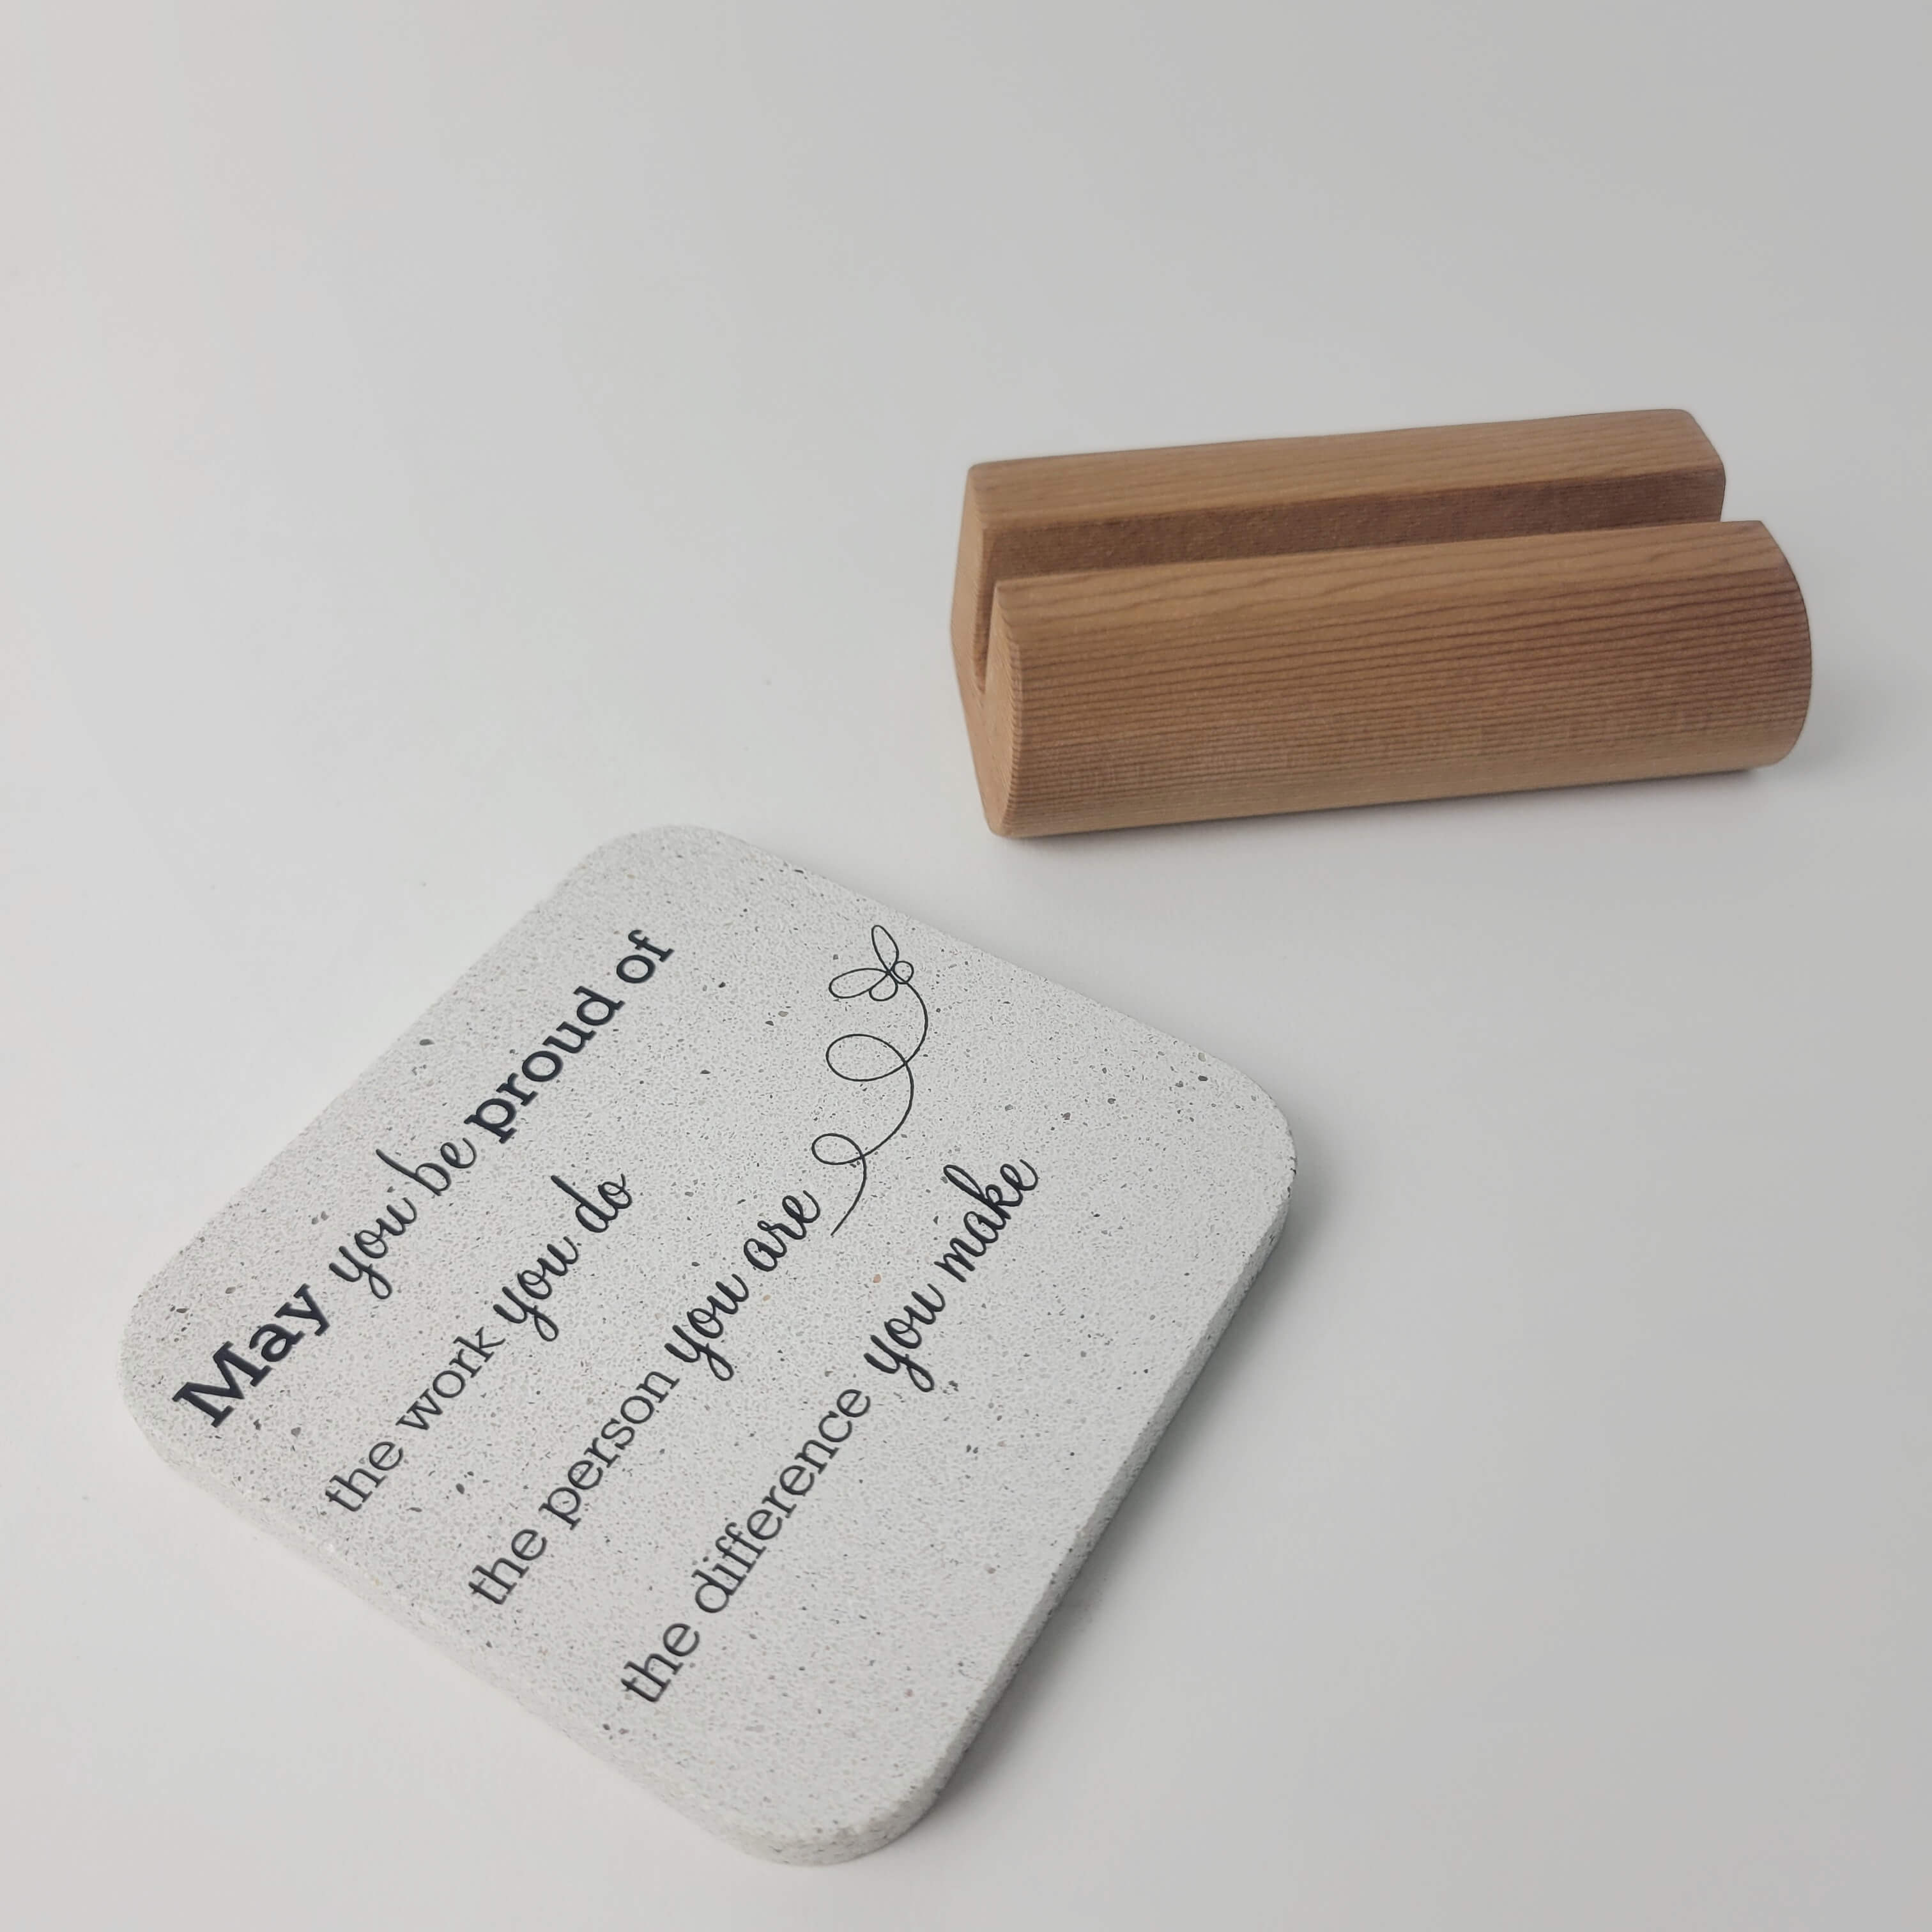 White stone motivational mini display 'May you be proud' lying flat in the foreground with notched upcycled western red-cedar base in the background for office and home decor.